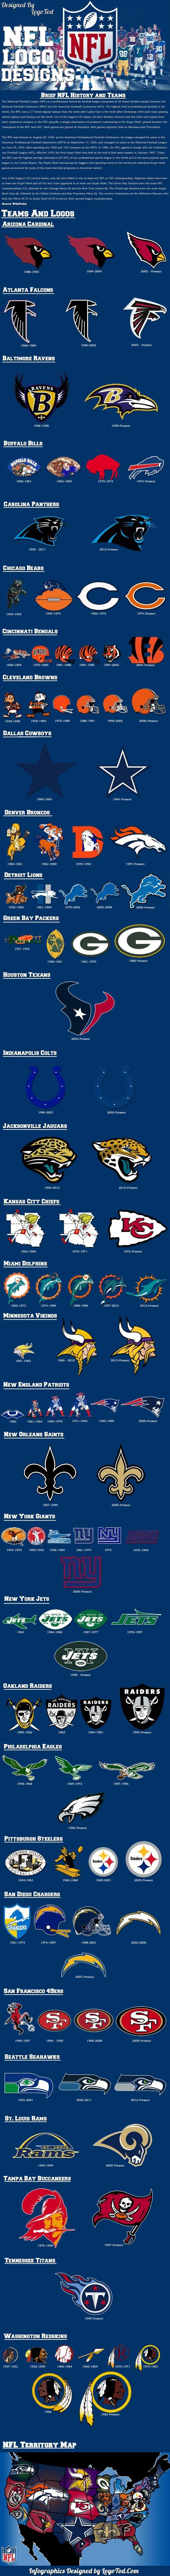 NFL American Football Logo - Picture: The evolution of every NFL logo from every team. JOE is